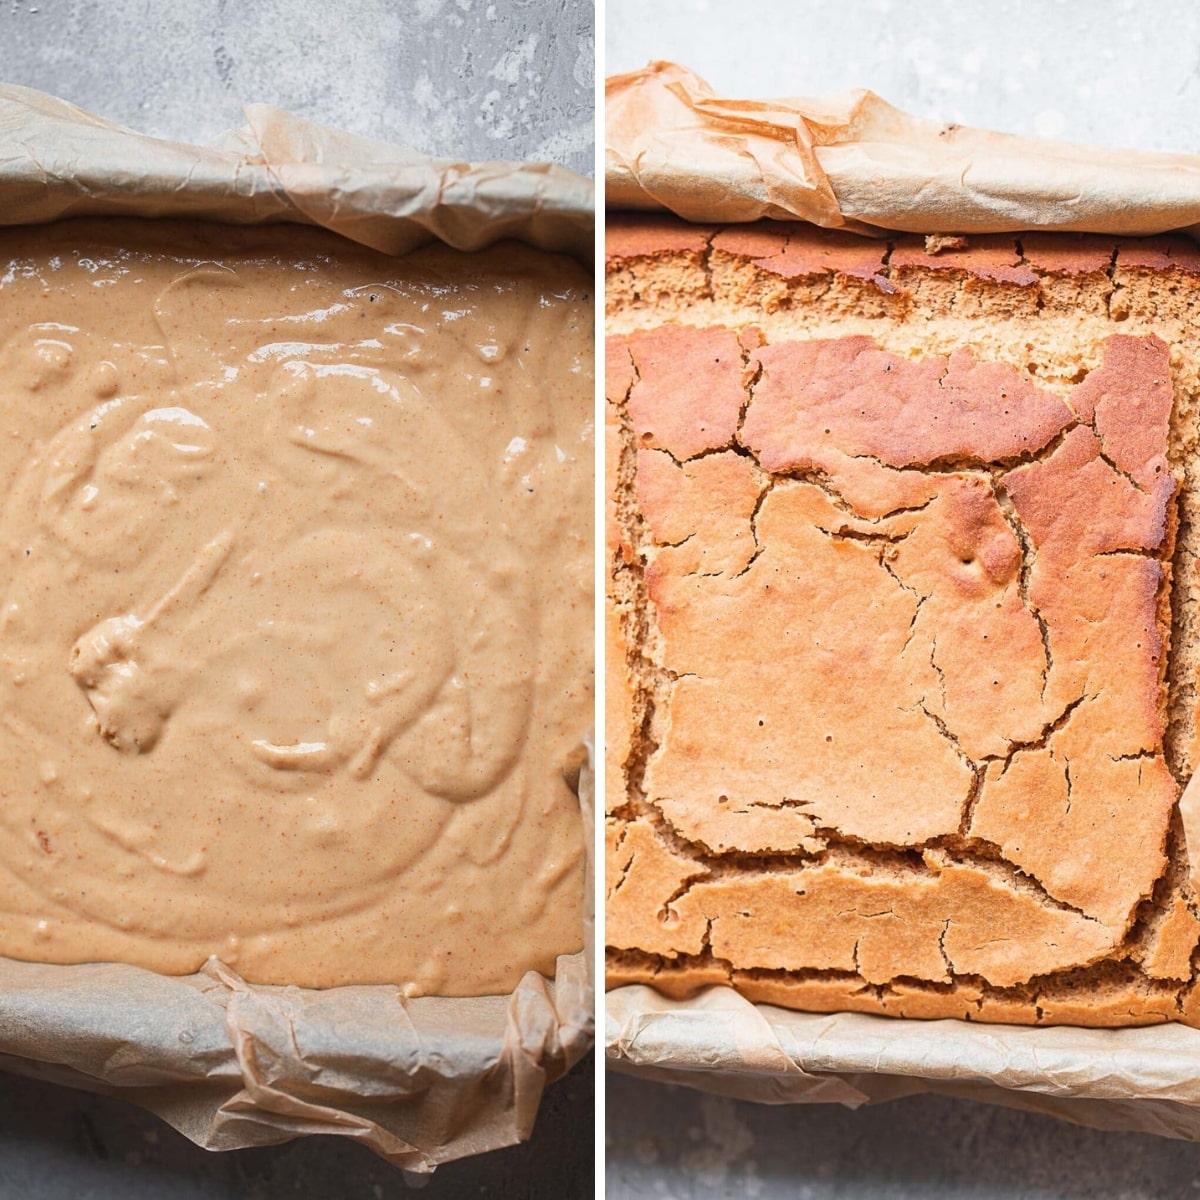 peanut butter cake before and after baking